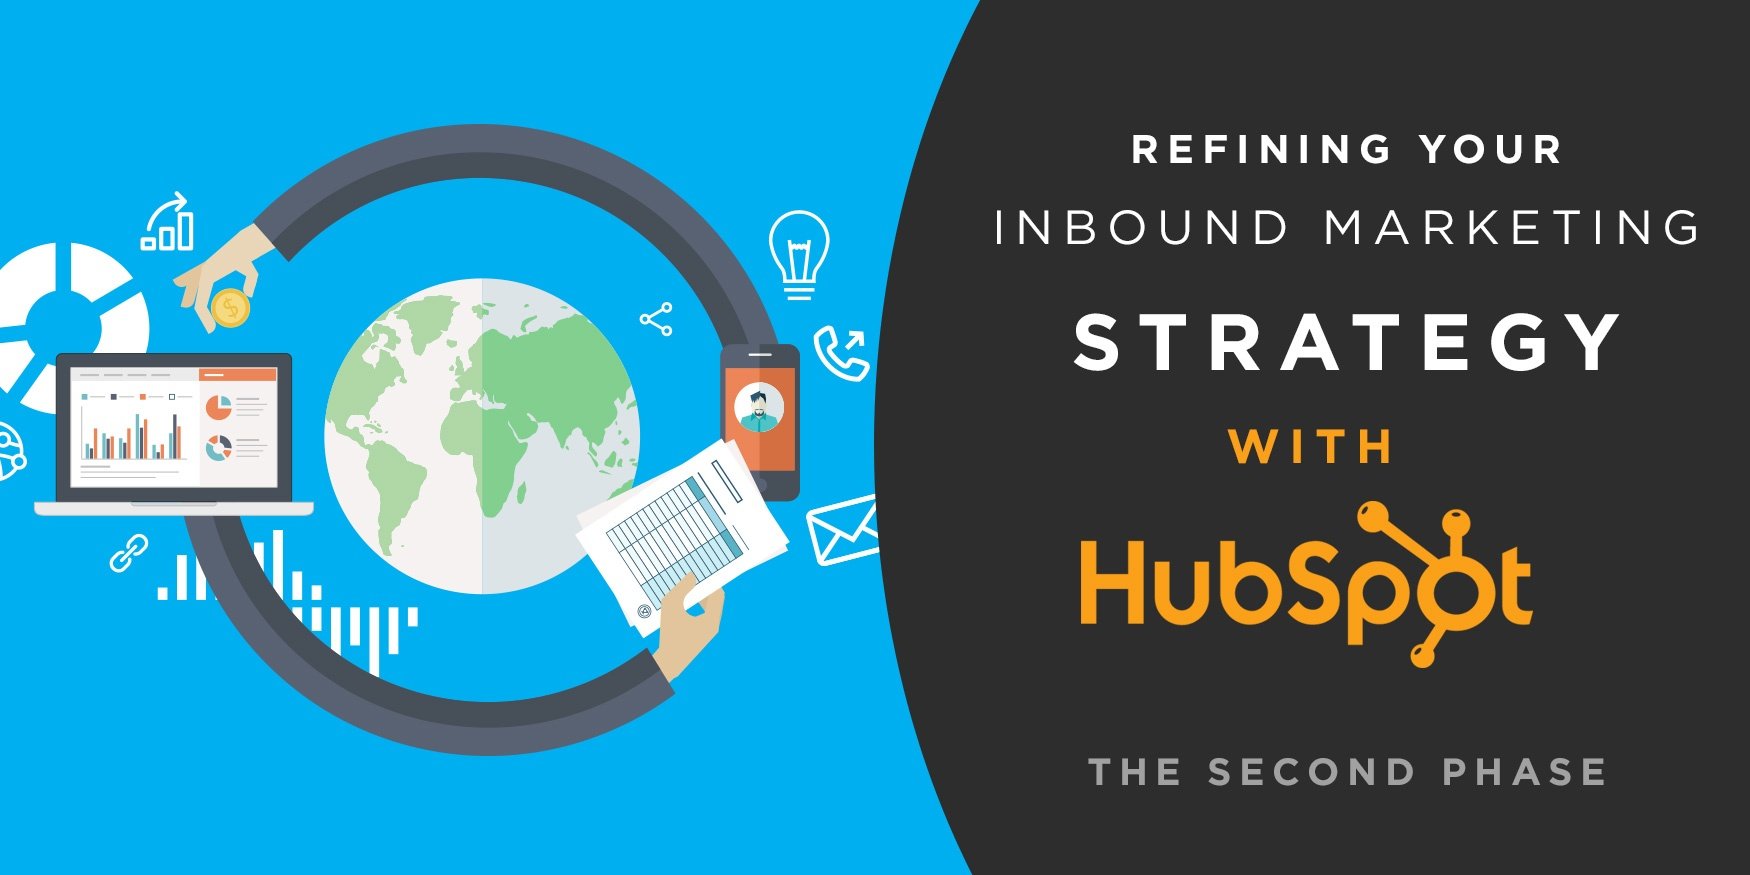 Refining Your Inbound Marketing Strategy with HubSpot